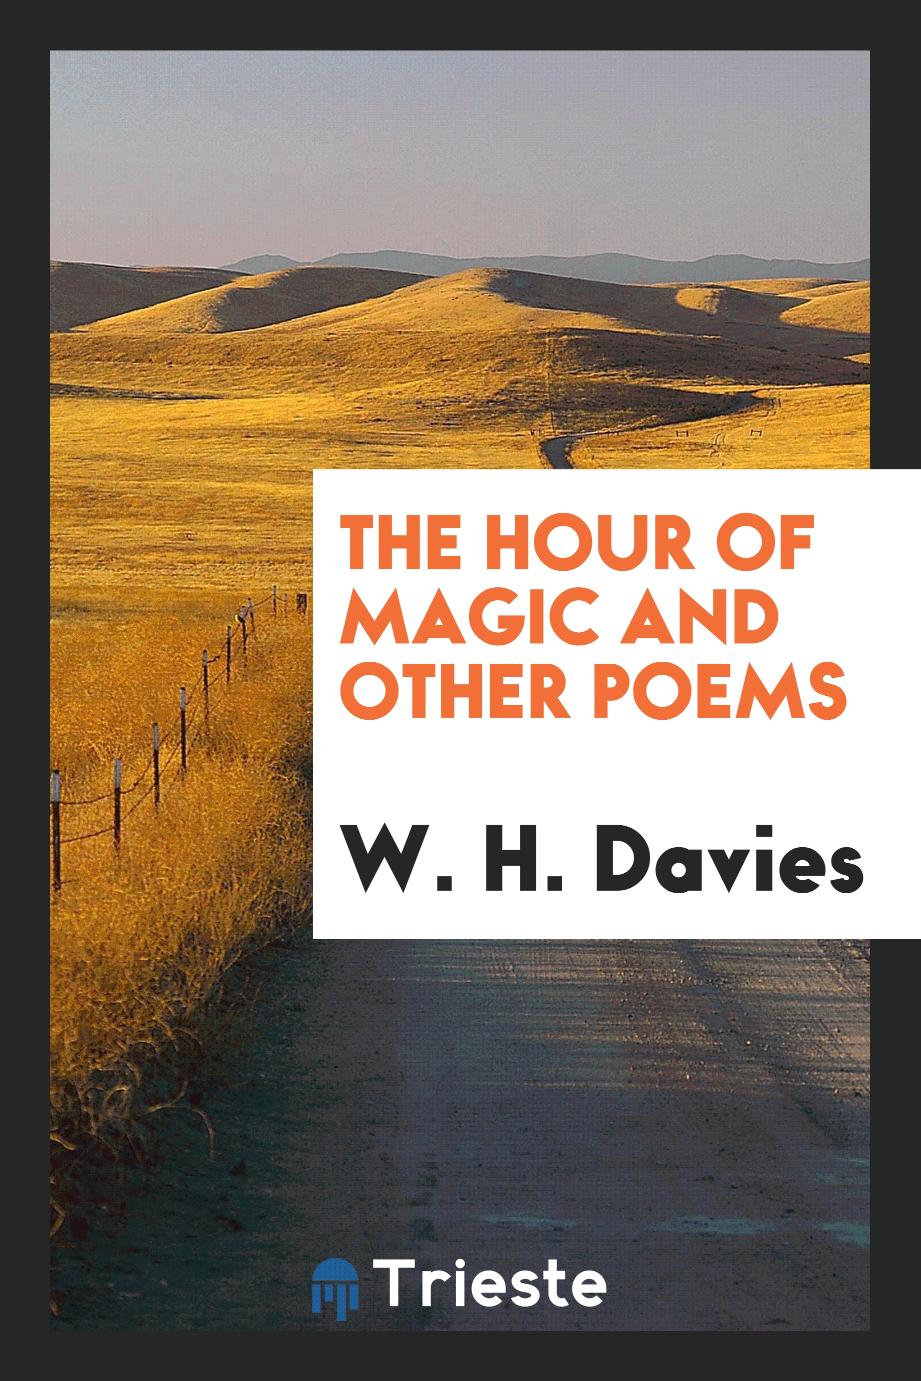 The hour of magic and other poems